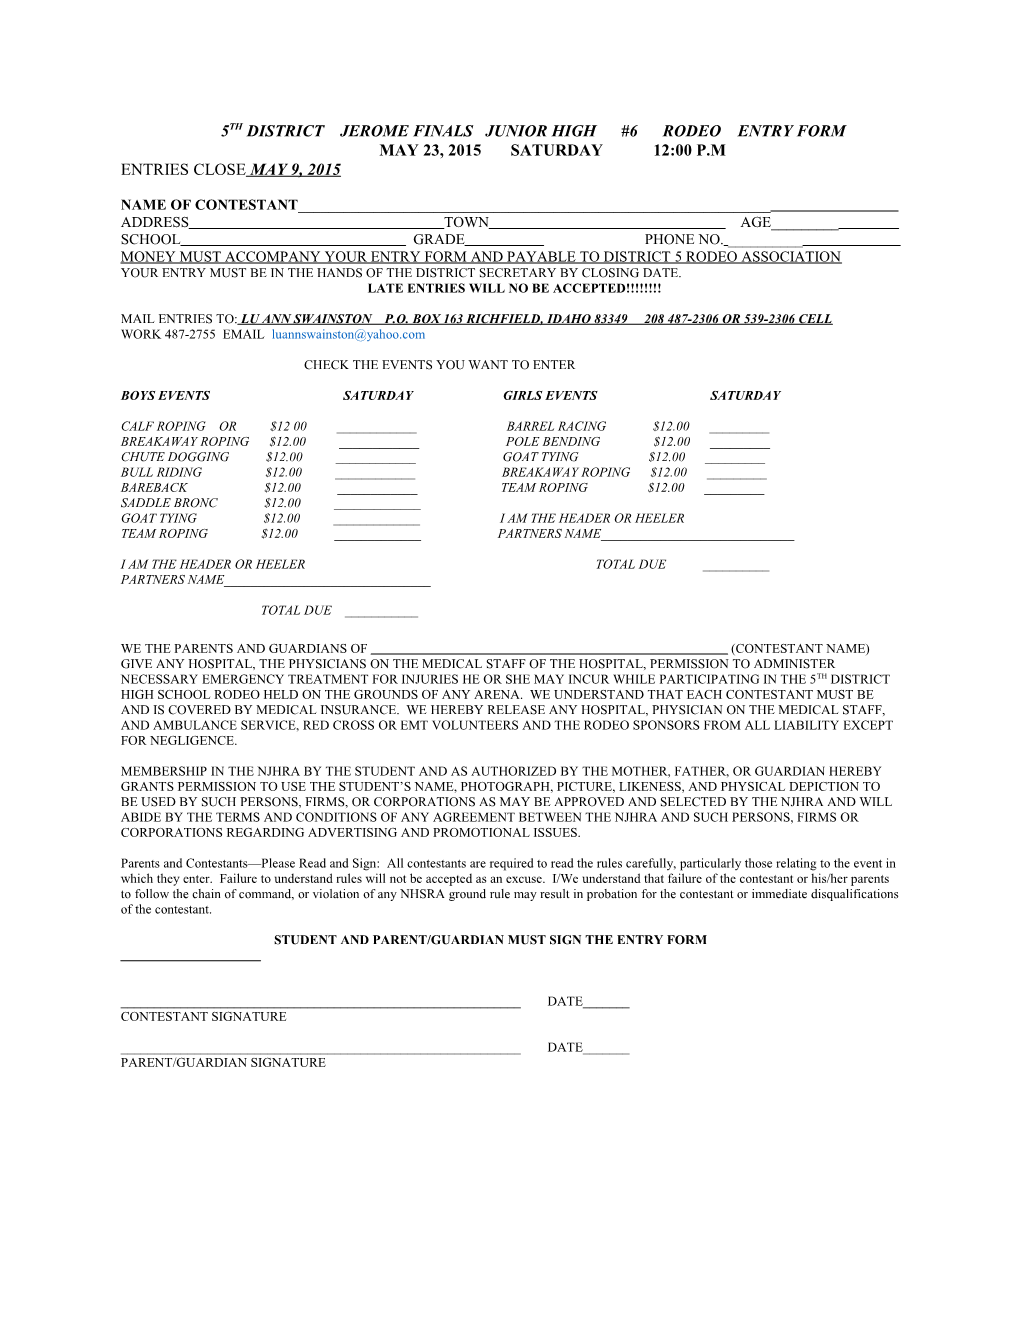 5Th District Finals Jerome High School Rodeo Entry Form